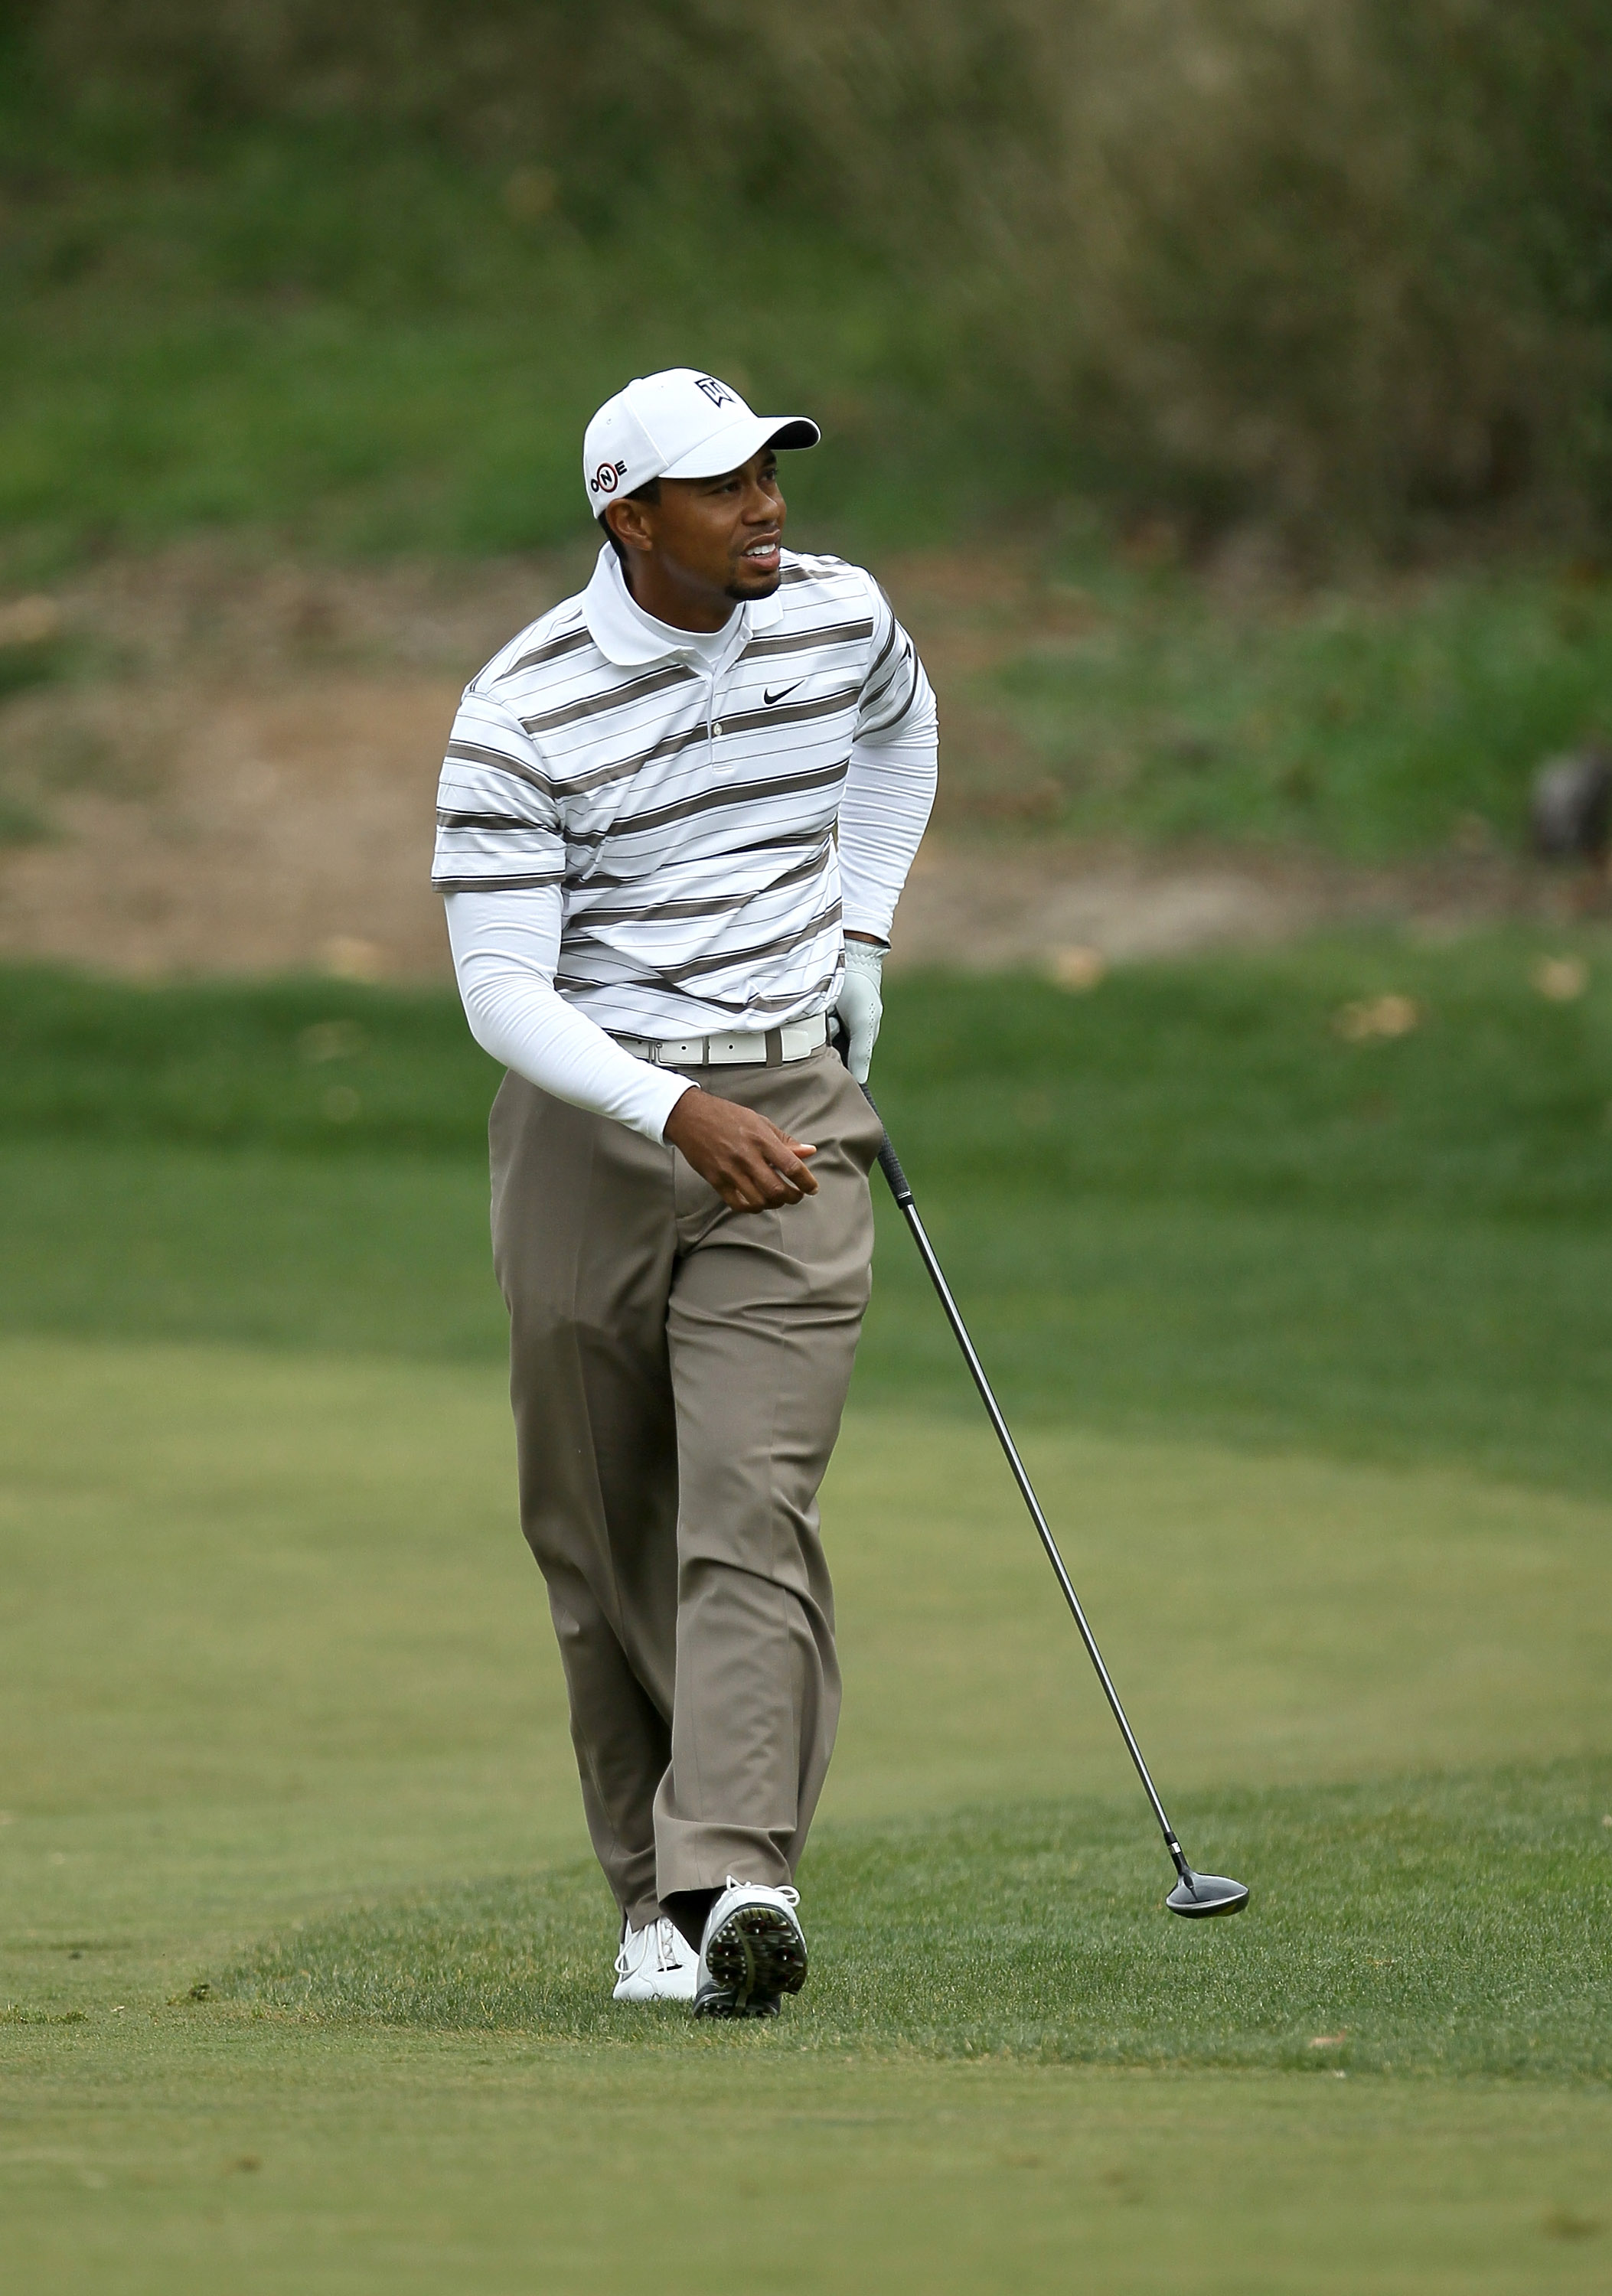 THOUSAND OAKS, CA - DECEMBER 04:  Tiger Woods watches his second shot on the fifth hole during round three of the Chevron World Challenge at Sherwood Country Club on December 4, 2010 in Thousand Oaks, California.  (Photo by Stephen Dunn/Getty Images)